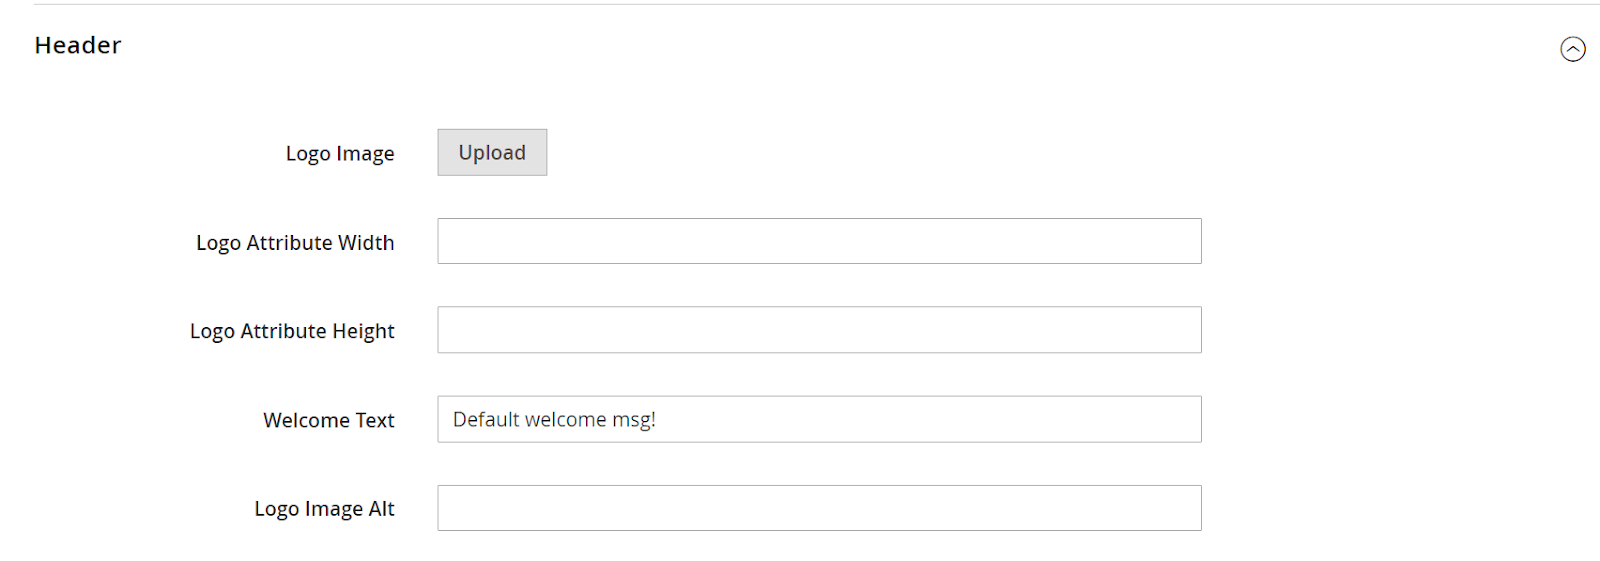 Change Welcome Message in Magento 2